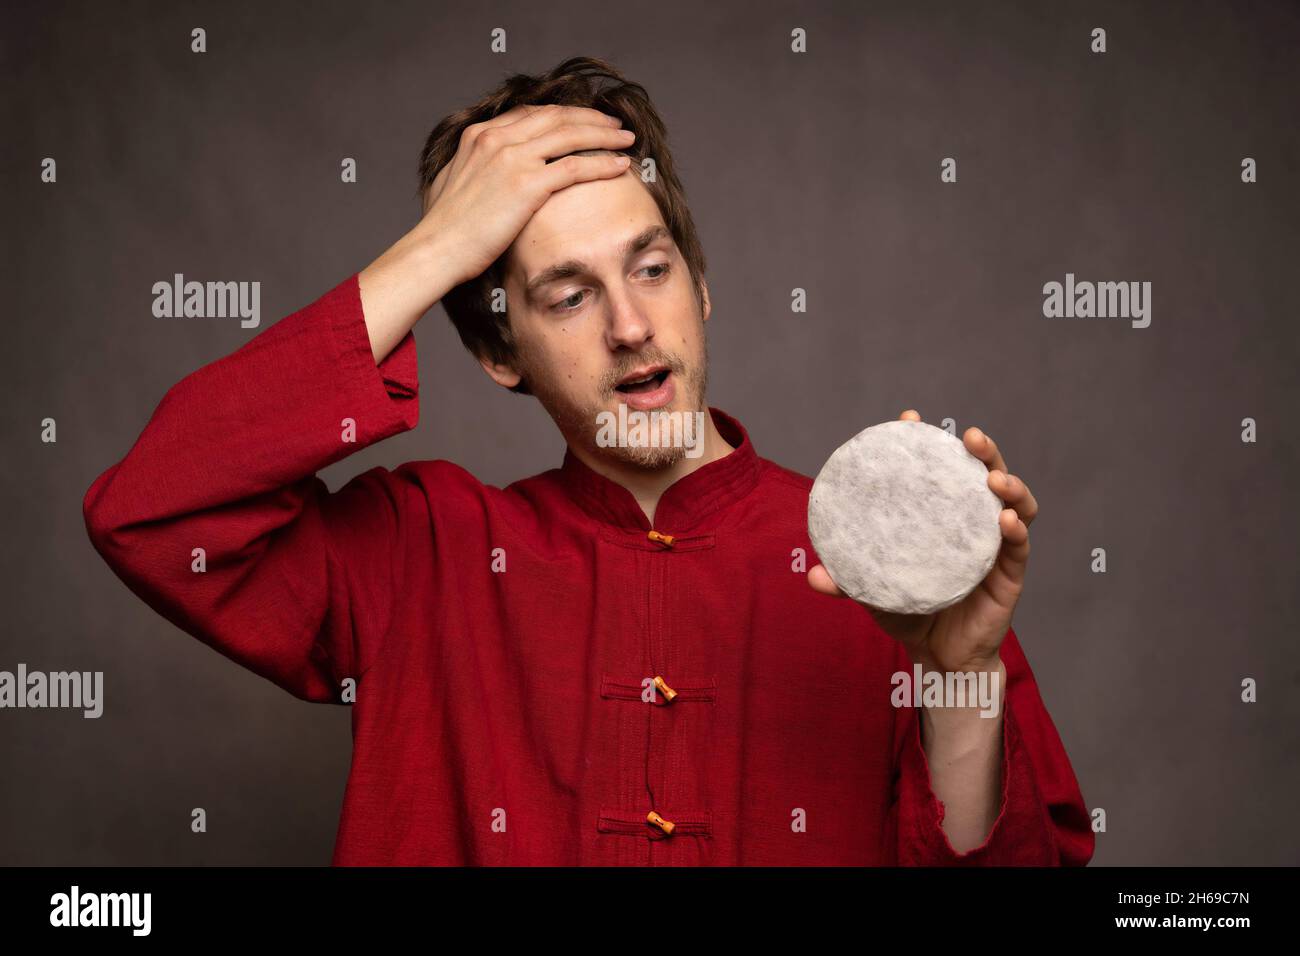 Young handsome tall slim white man with brown hair relieved holding pu erh tea cake in red shirt on grey background Stock Photo